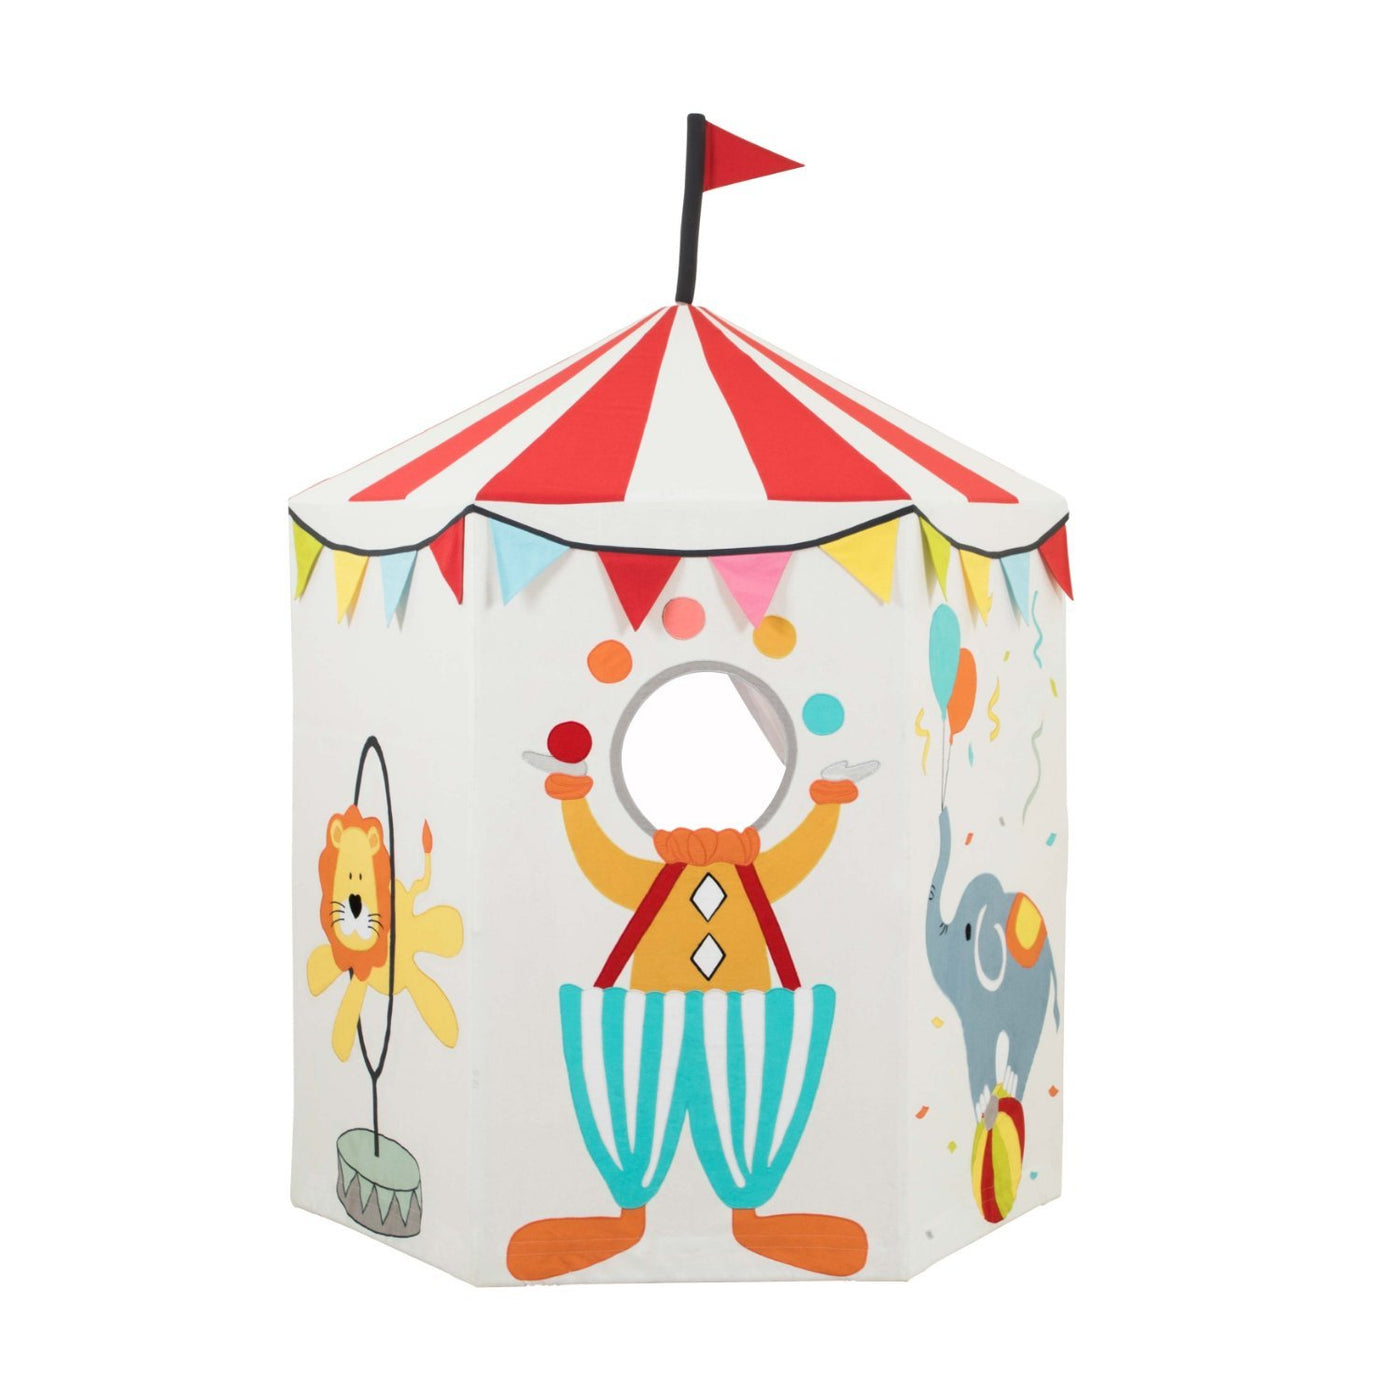 Deluxe Circus Playhouse Tent | Role Play